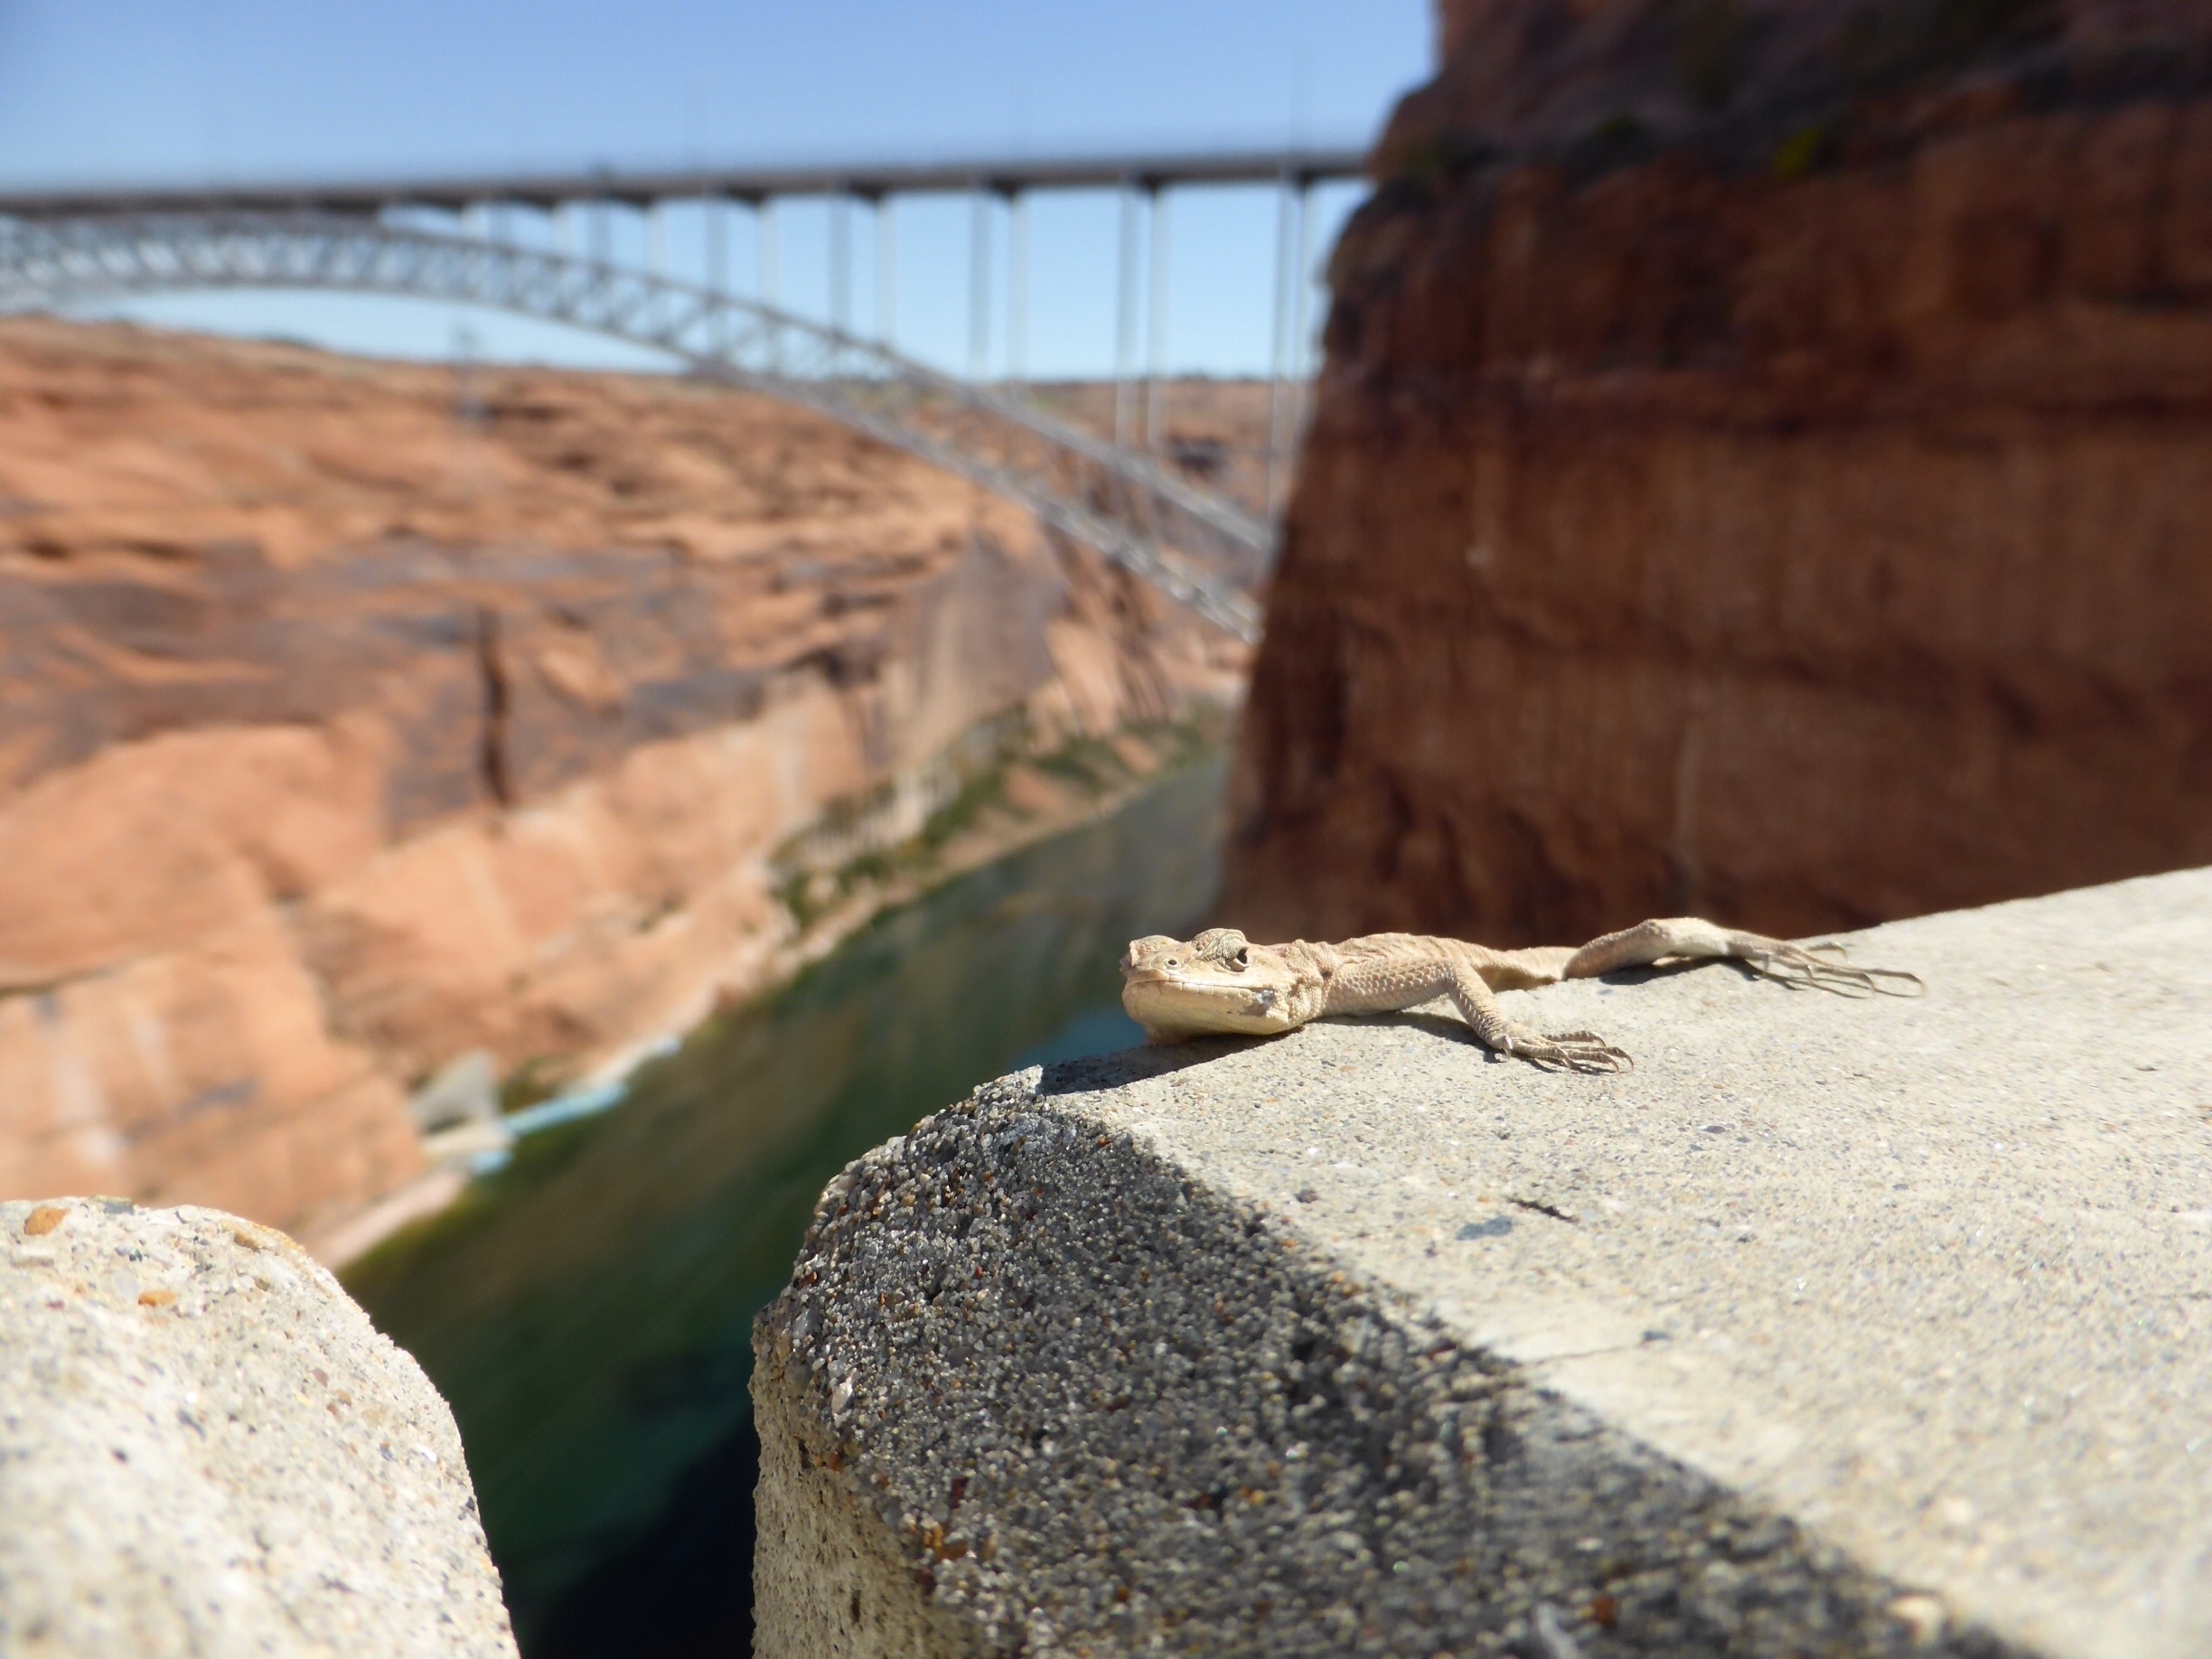 Cute gecko hanging on the edge of the wall at Glen Canyon Dam. 